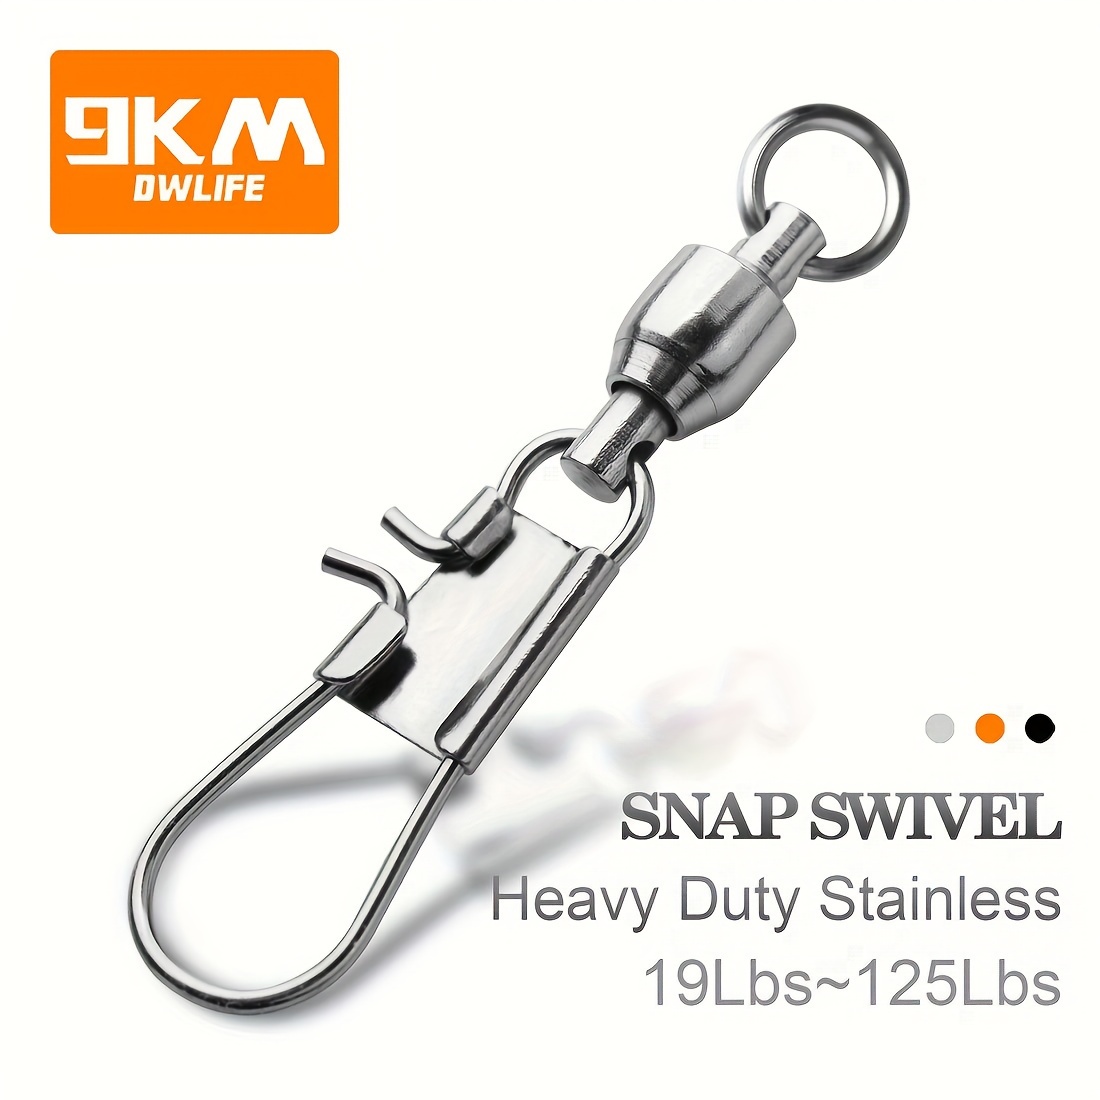 

Heavy Duty Stainless Steel Fishing Swivels With Interlock Snap - Ideal For Saltwater And Freshwater Fishing, 9km Ball Bearing For Smooth Rotation